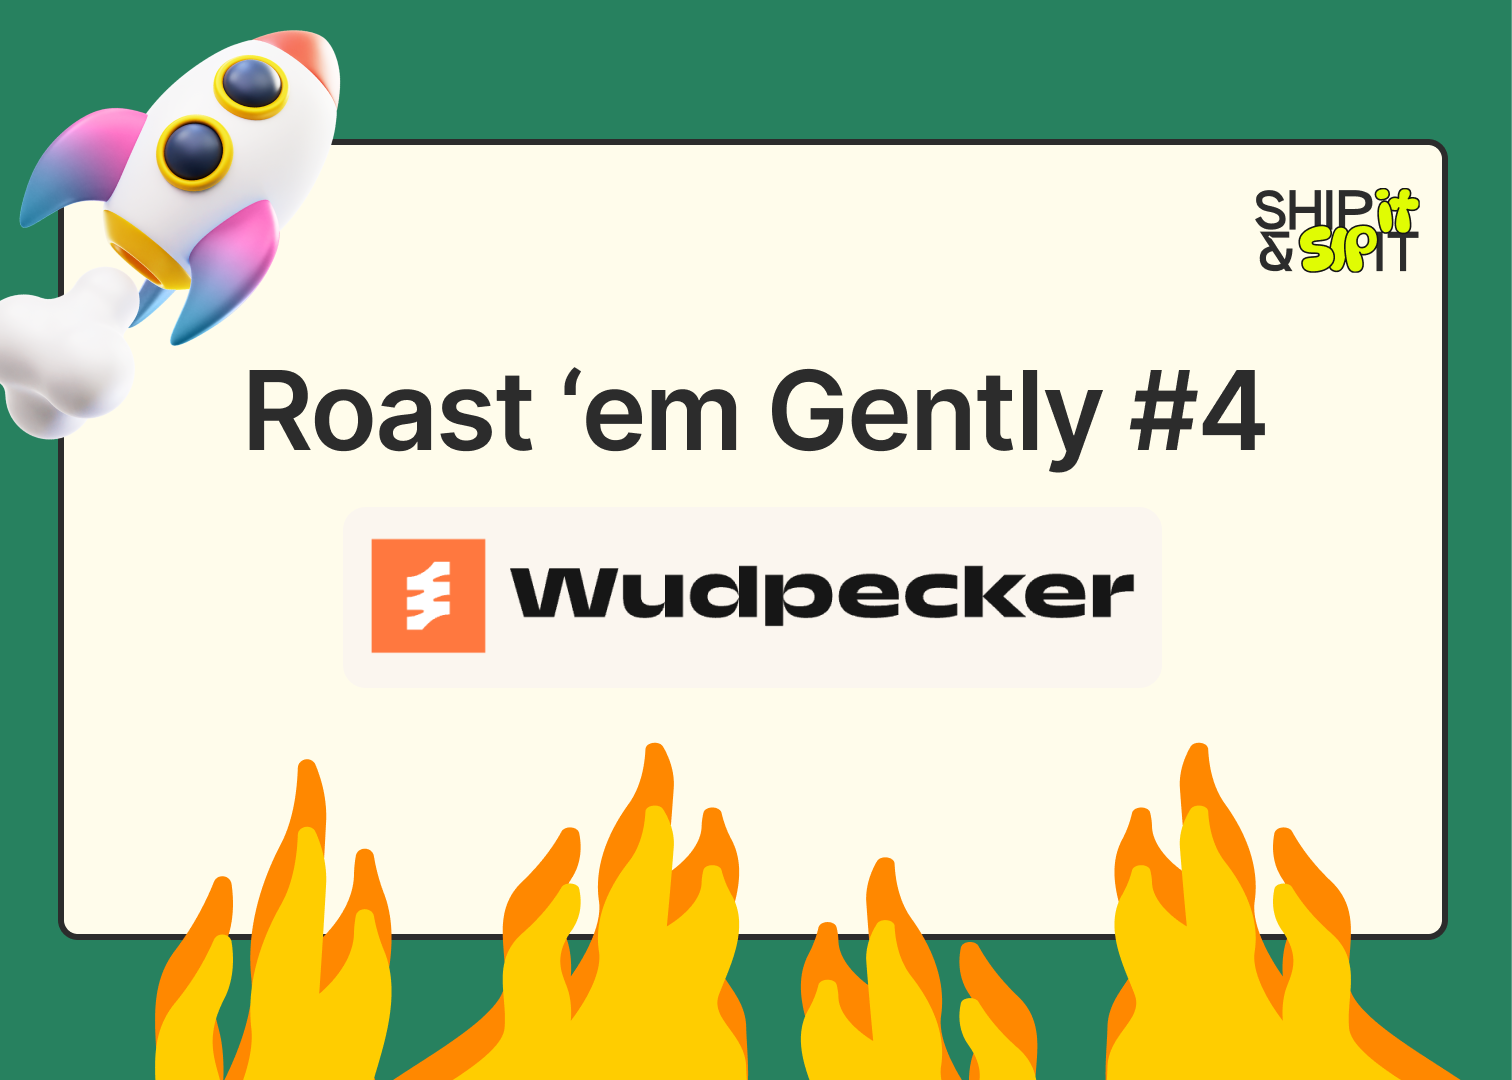 Drowning in forgotten info from your meetings? Check out Wudpecker v2 | Roast 'em #4